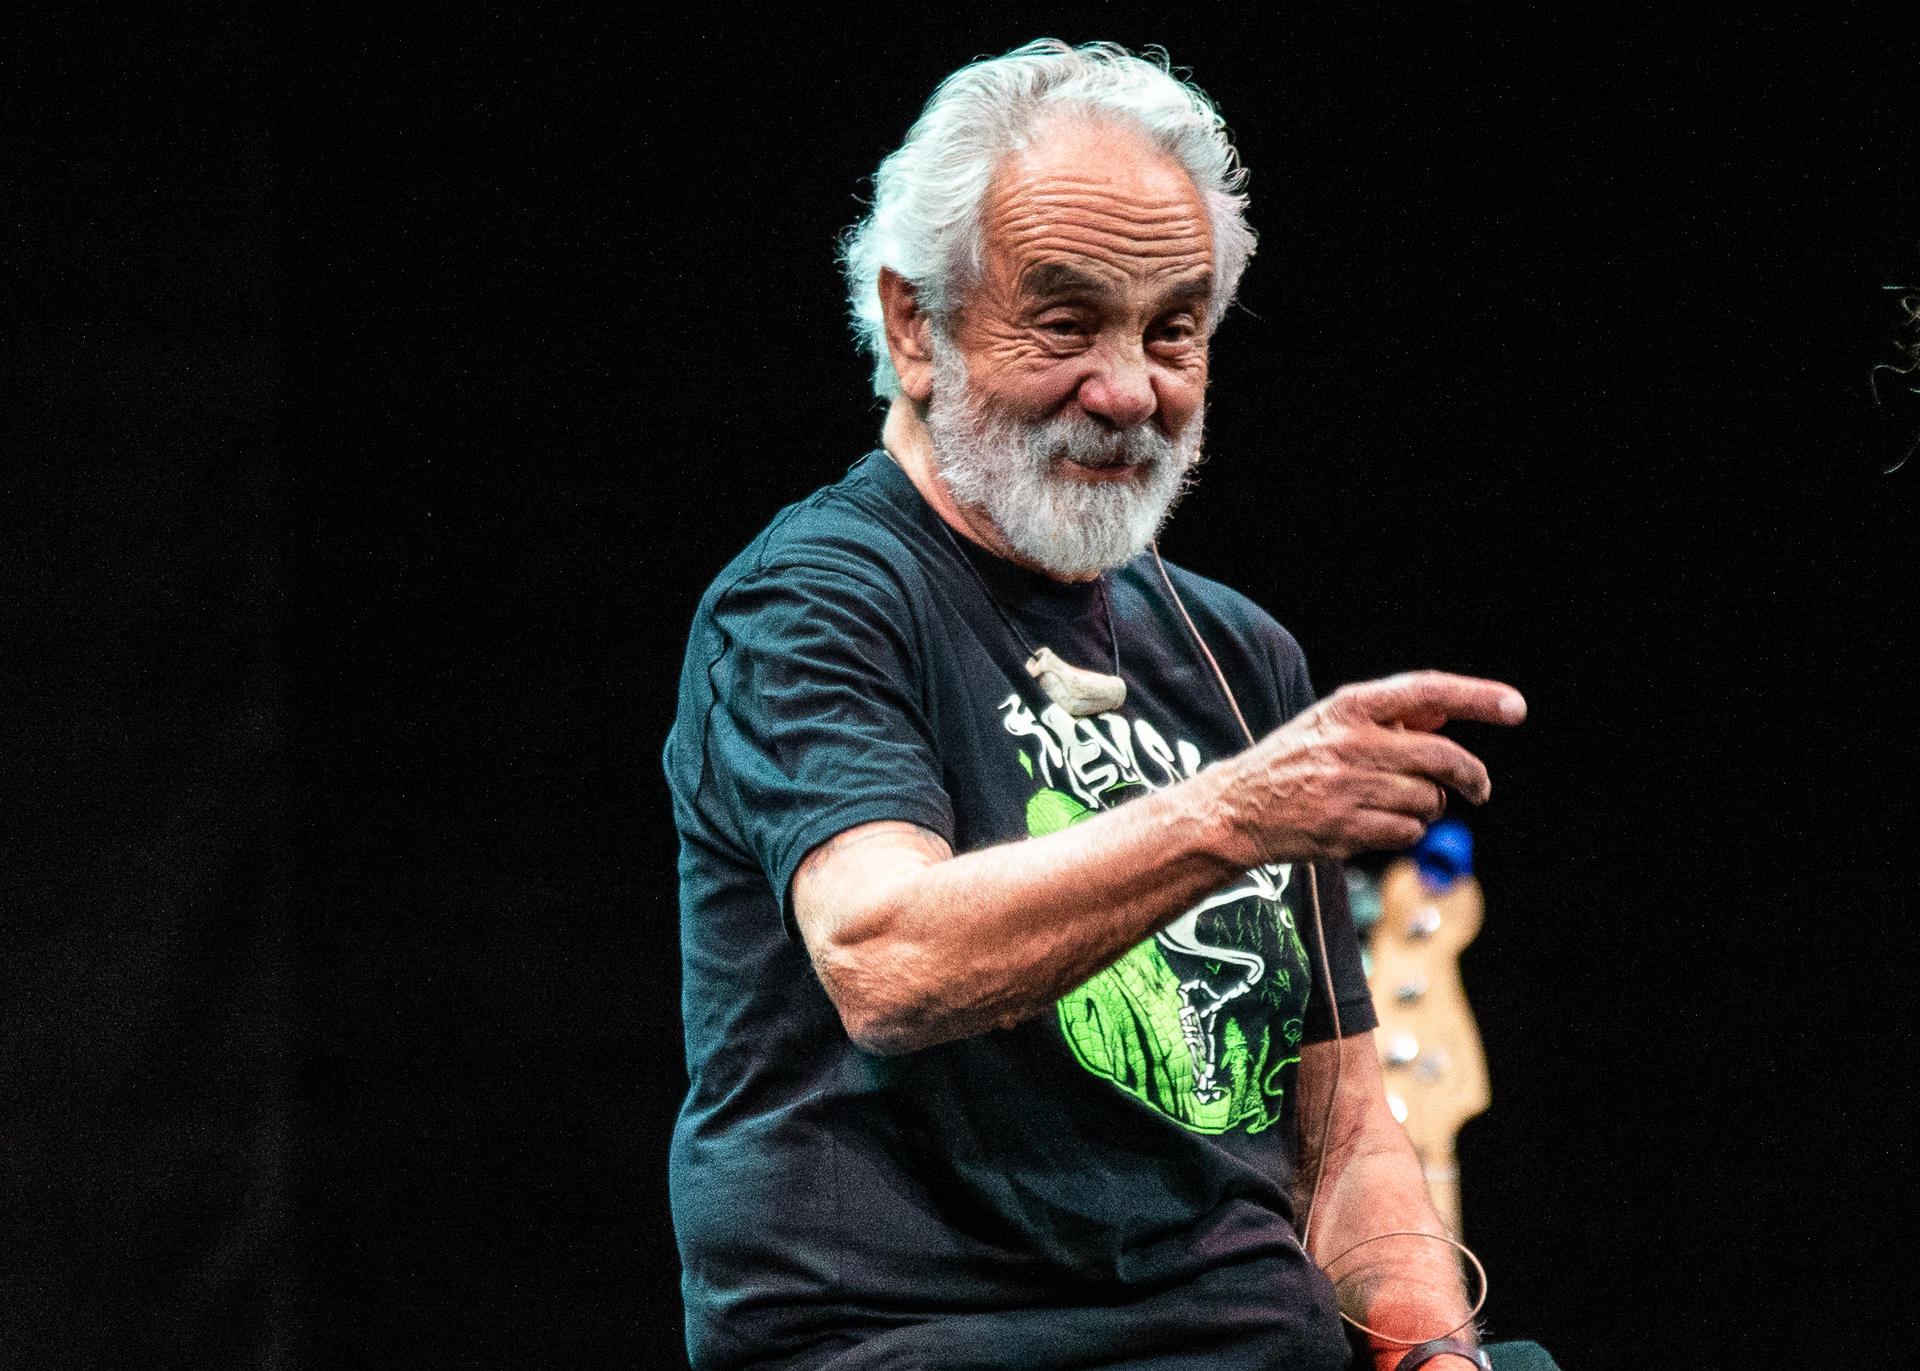 Tommy Chong sits on a stool, his face lit up with laughter as he playfully points towards the audience, creating a moment of shared joy and connection.